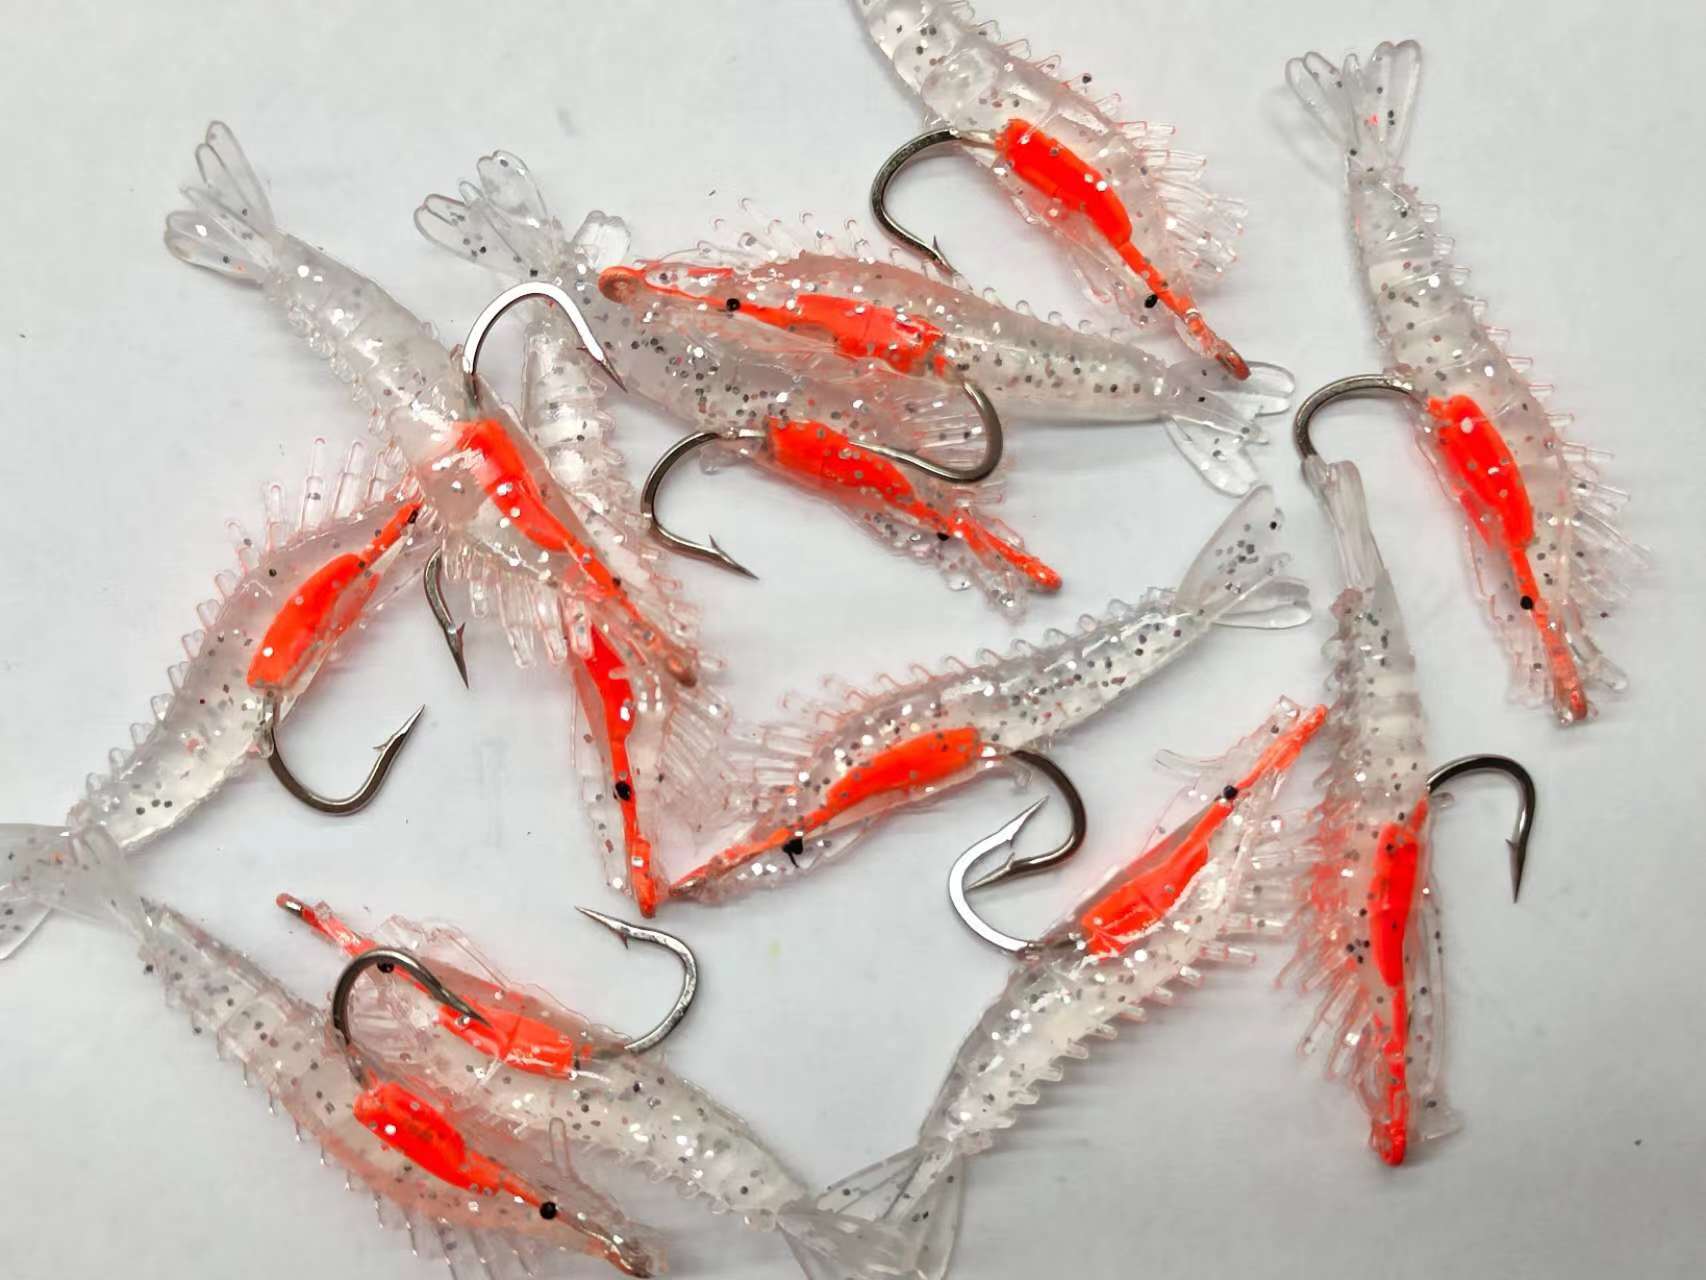 shrimp fishing hook, shrimp fishing hook Suppliers and Manufacturers at